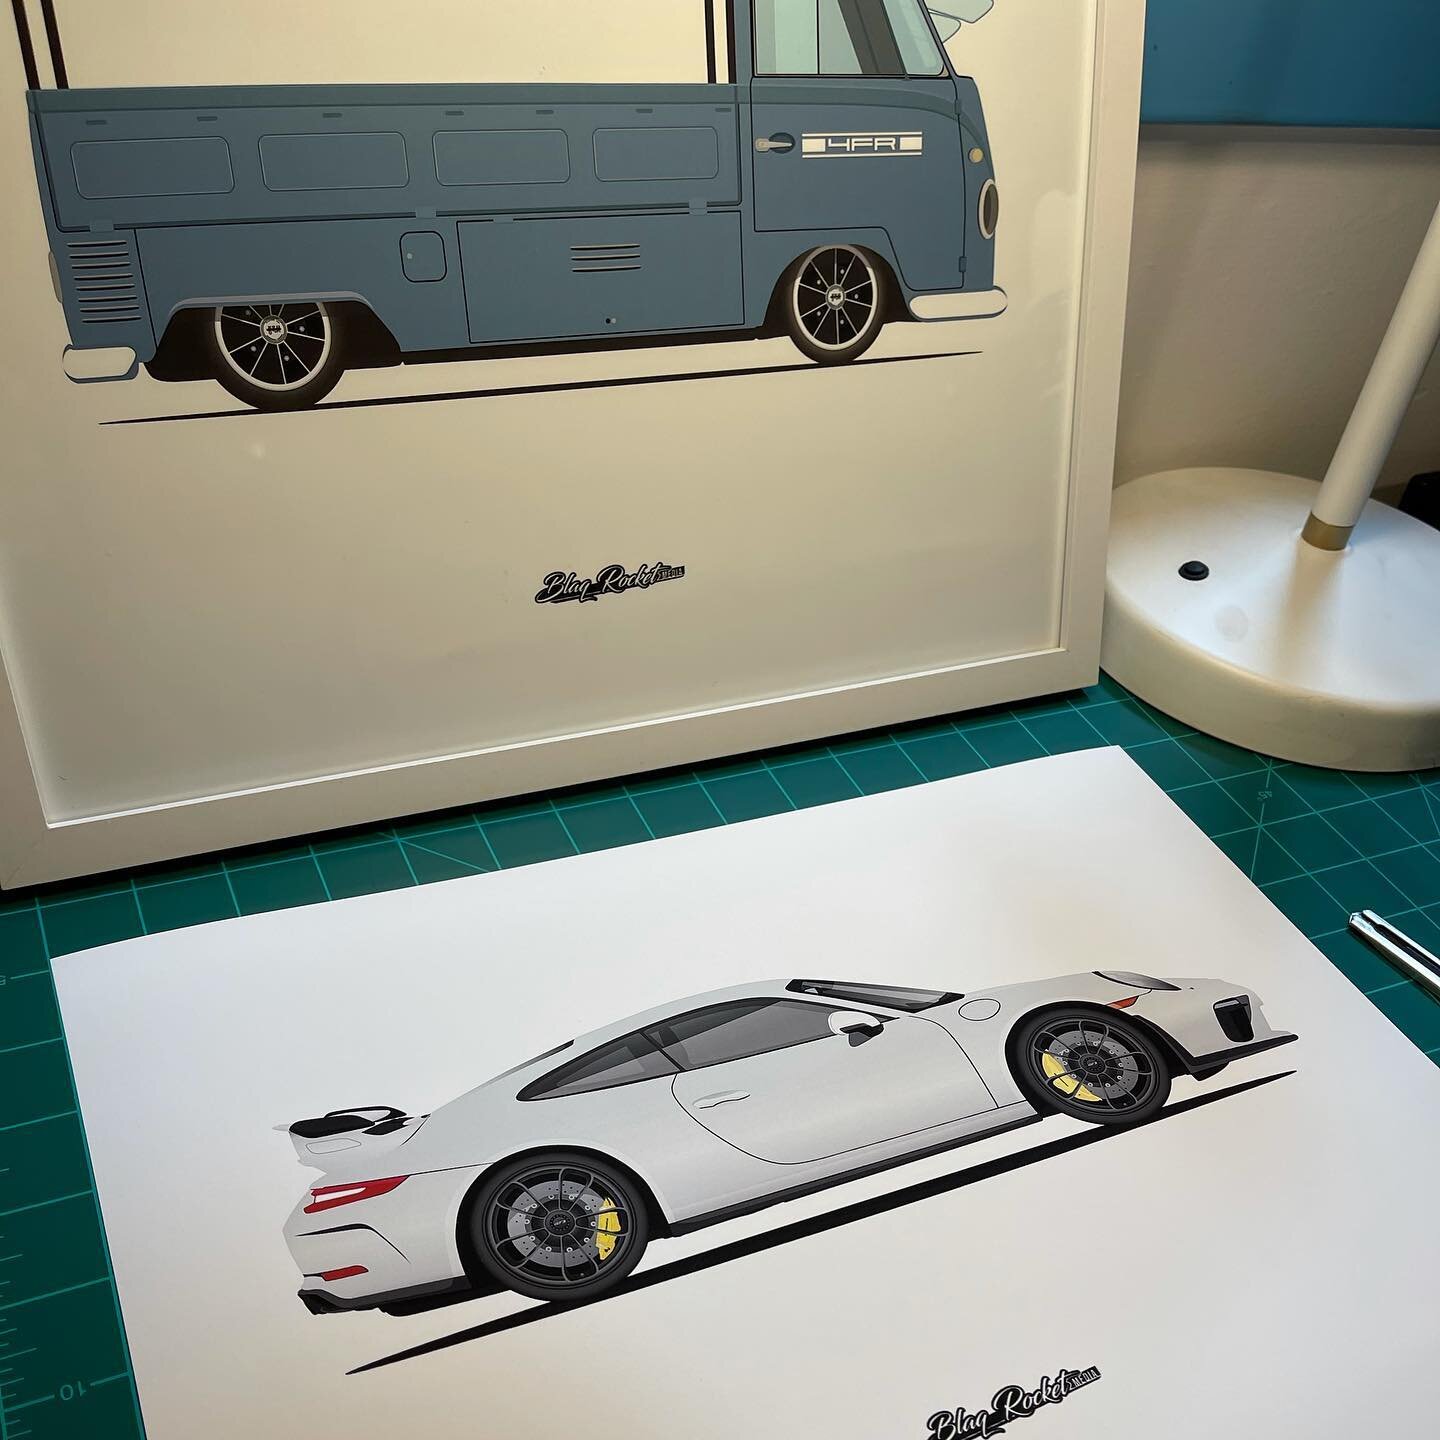 Printed some of @4frcars that I am sending him. It&rsquo;s so nice to have them in printed form. #porsche #vwbus #vectorart #graphicdesign